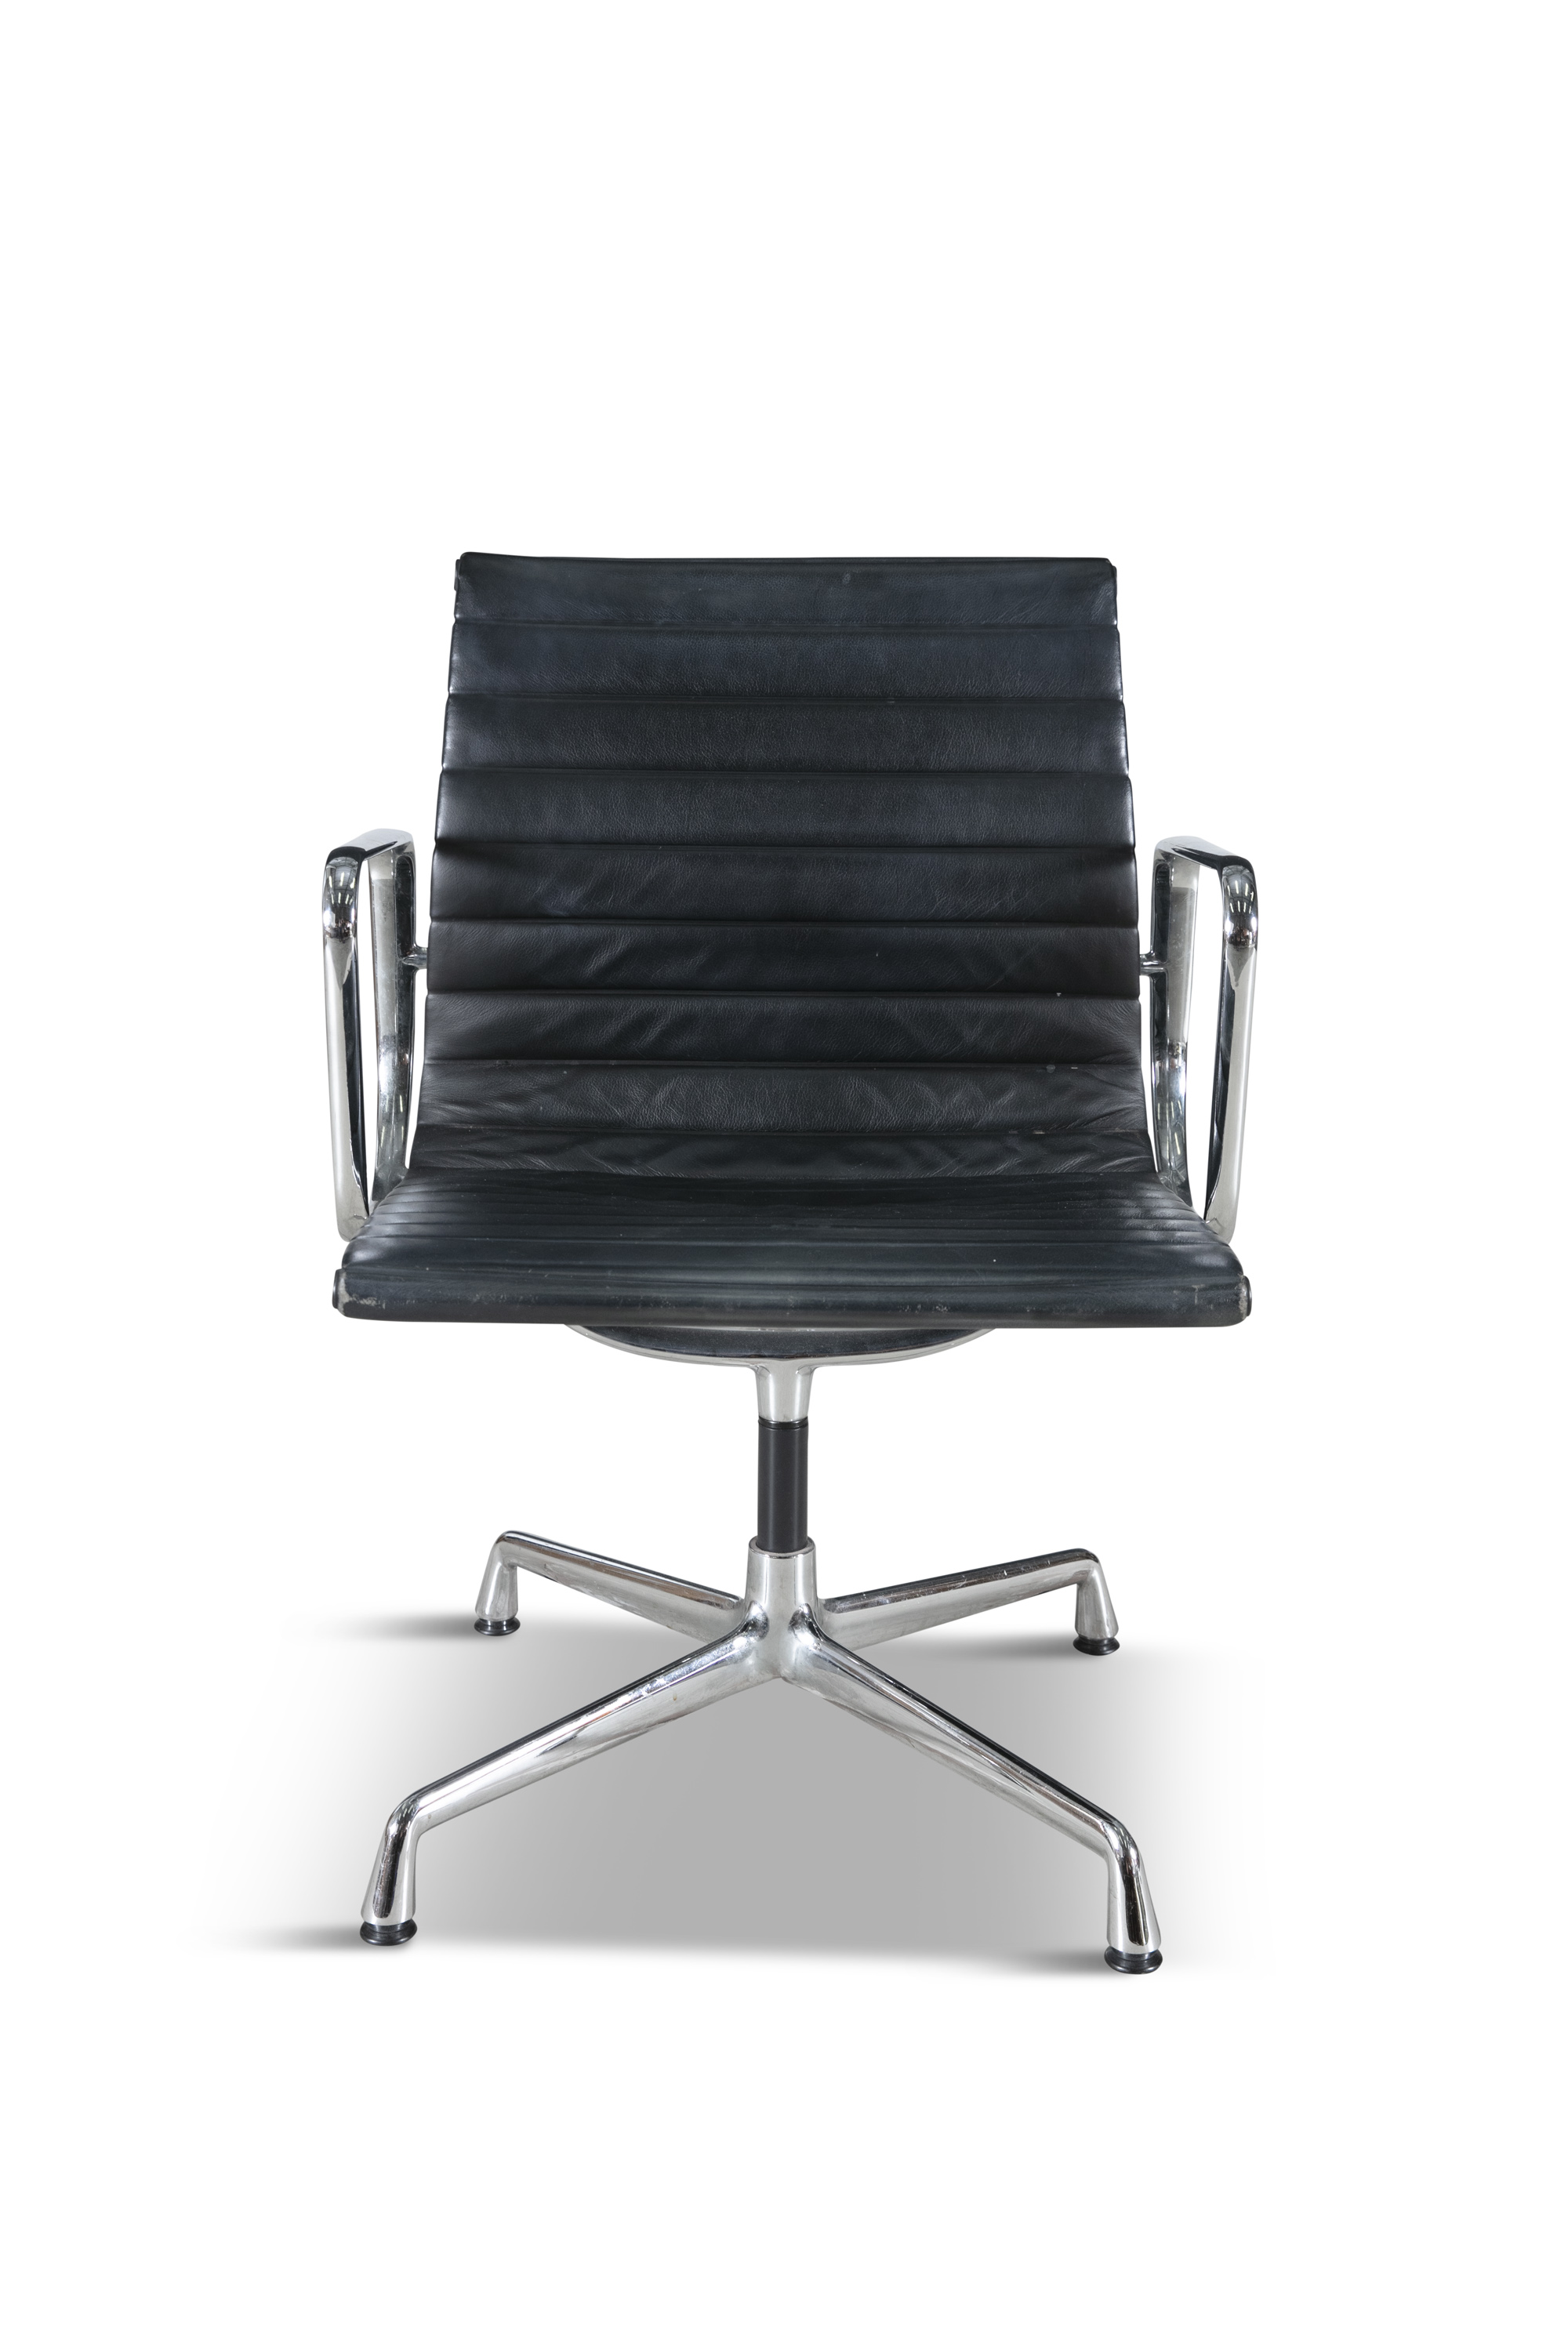 EAMES An EA108 office chair, by Eames, produced by Vitra, with maker's label. 82 x 58.5 x 52cm